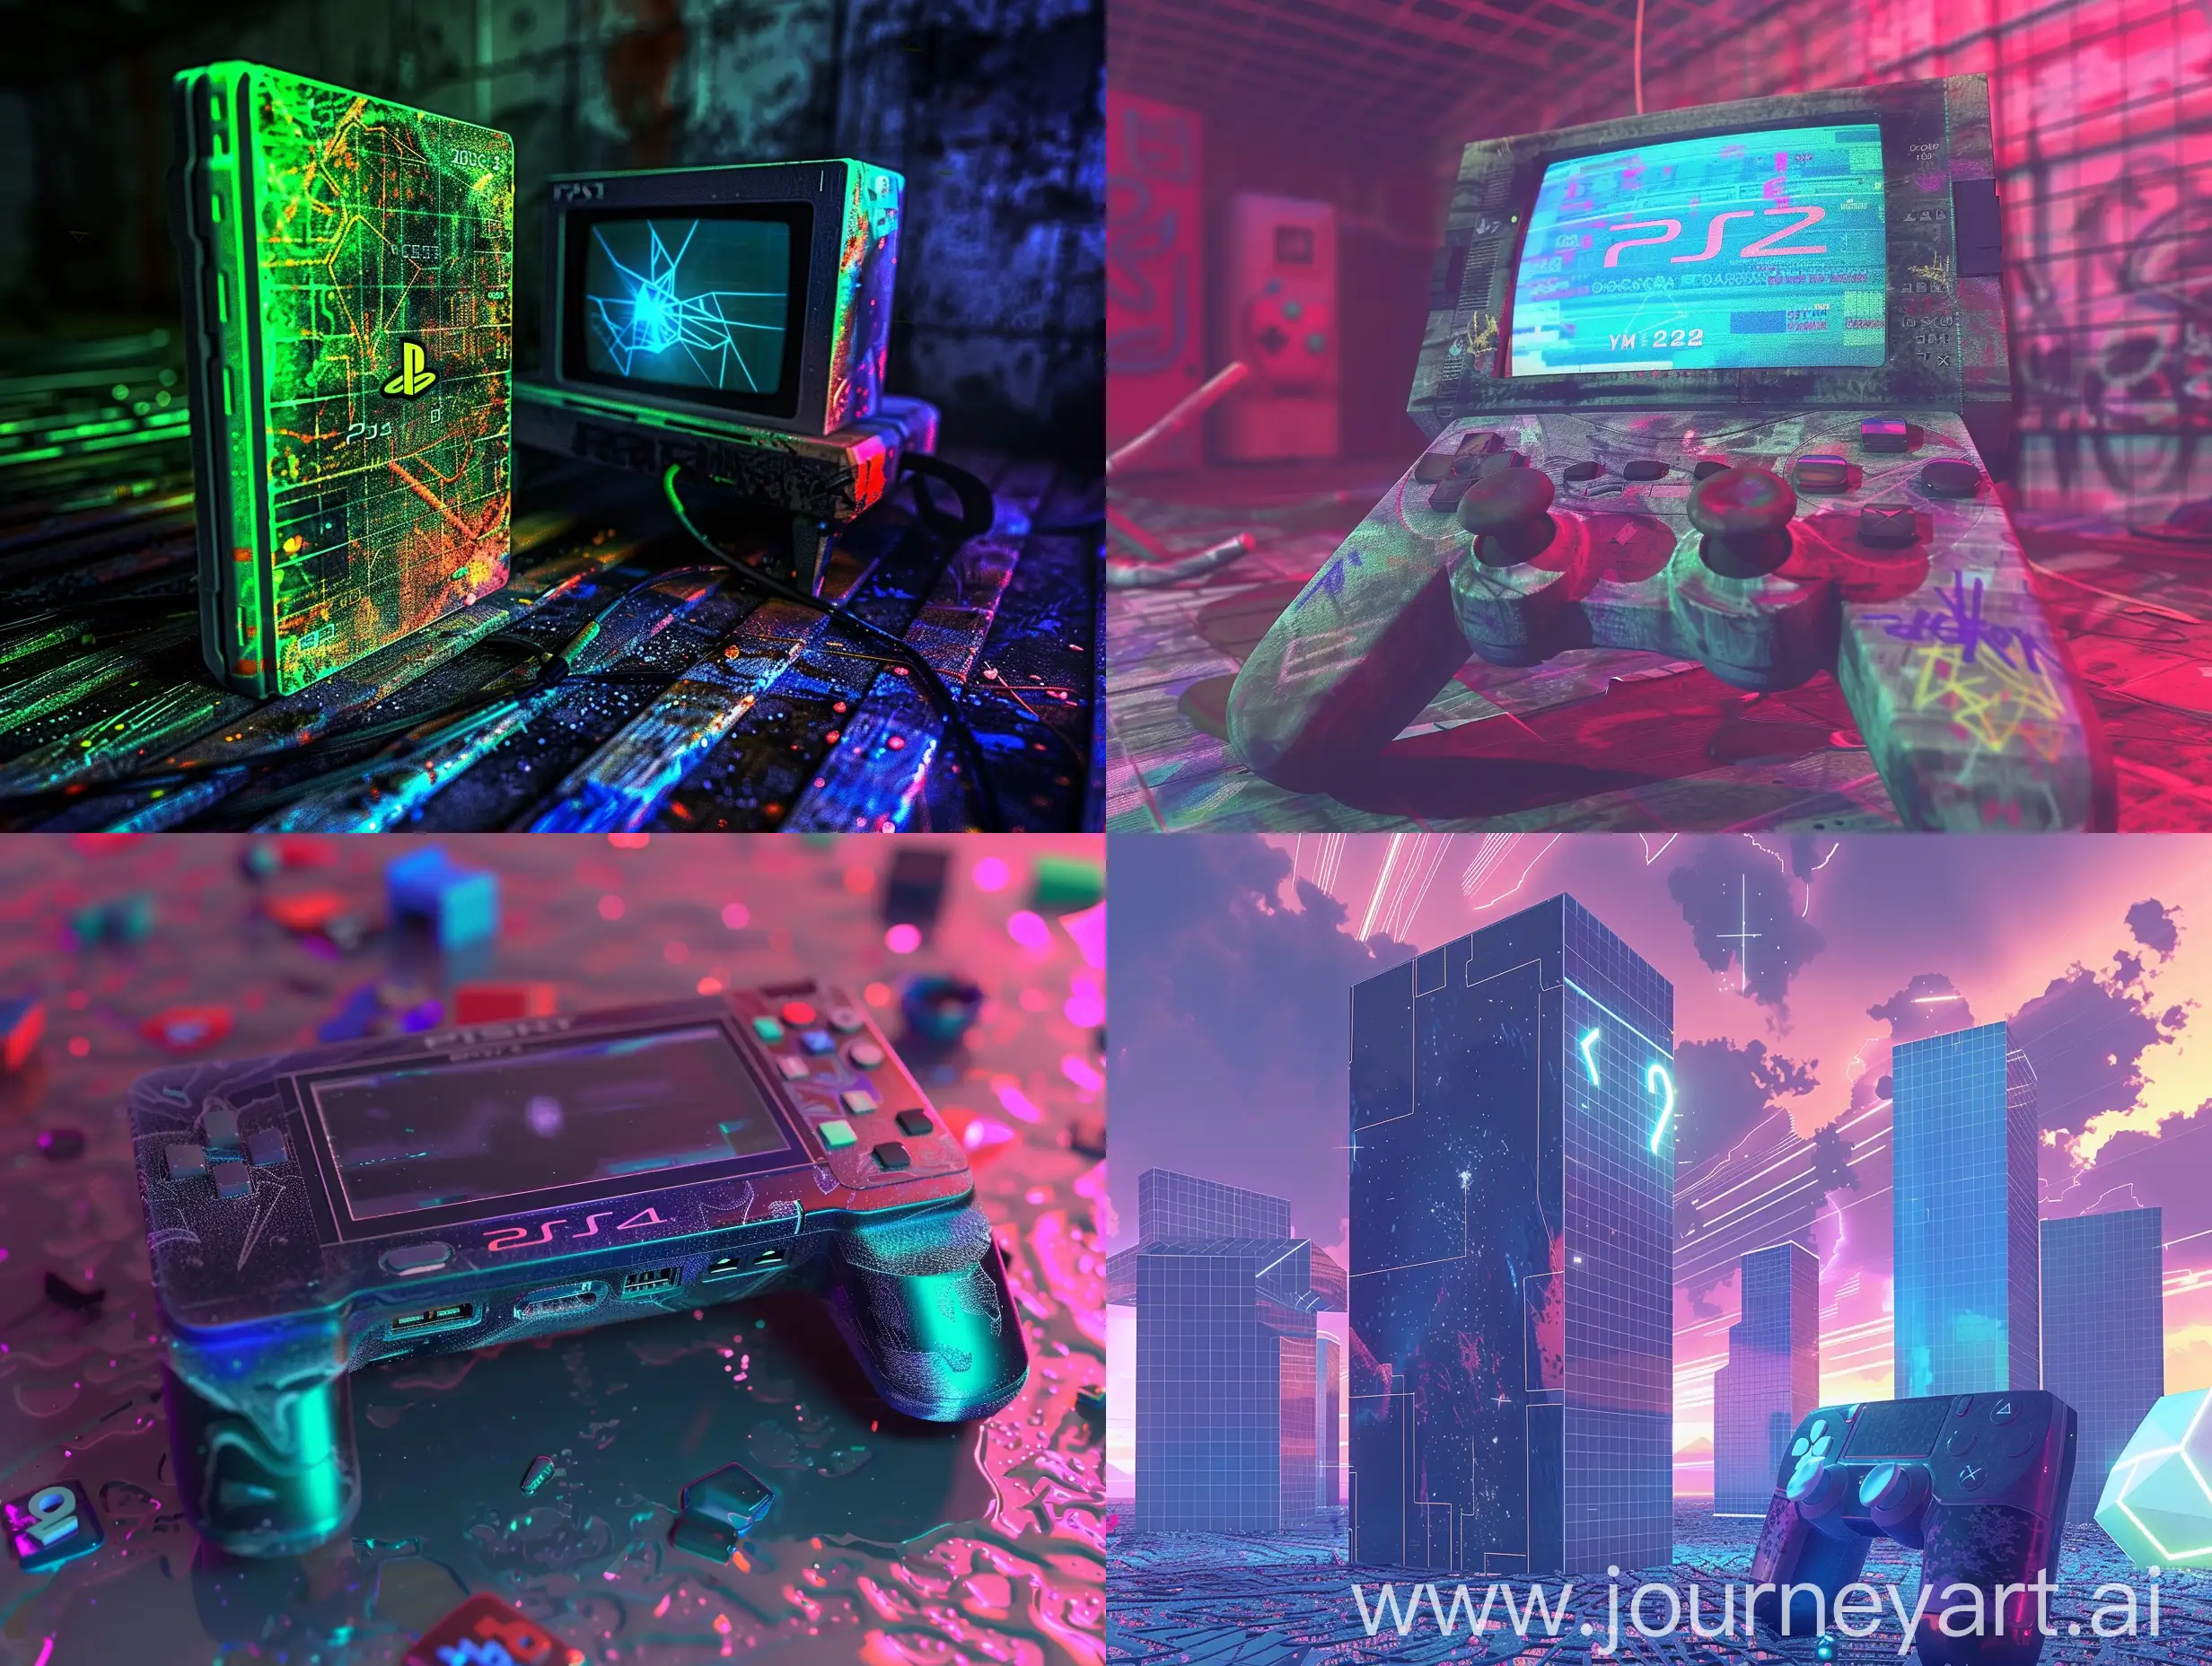 Nostalgic-Futurism-Retro-PlayStation-2-Graphics-and-Cellphone-in-Y2K-Aesthetic-Environment